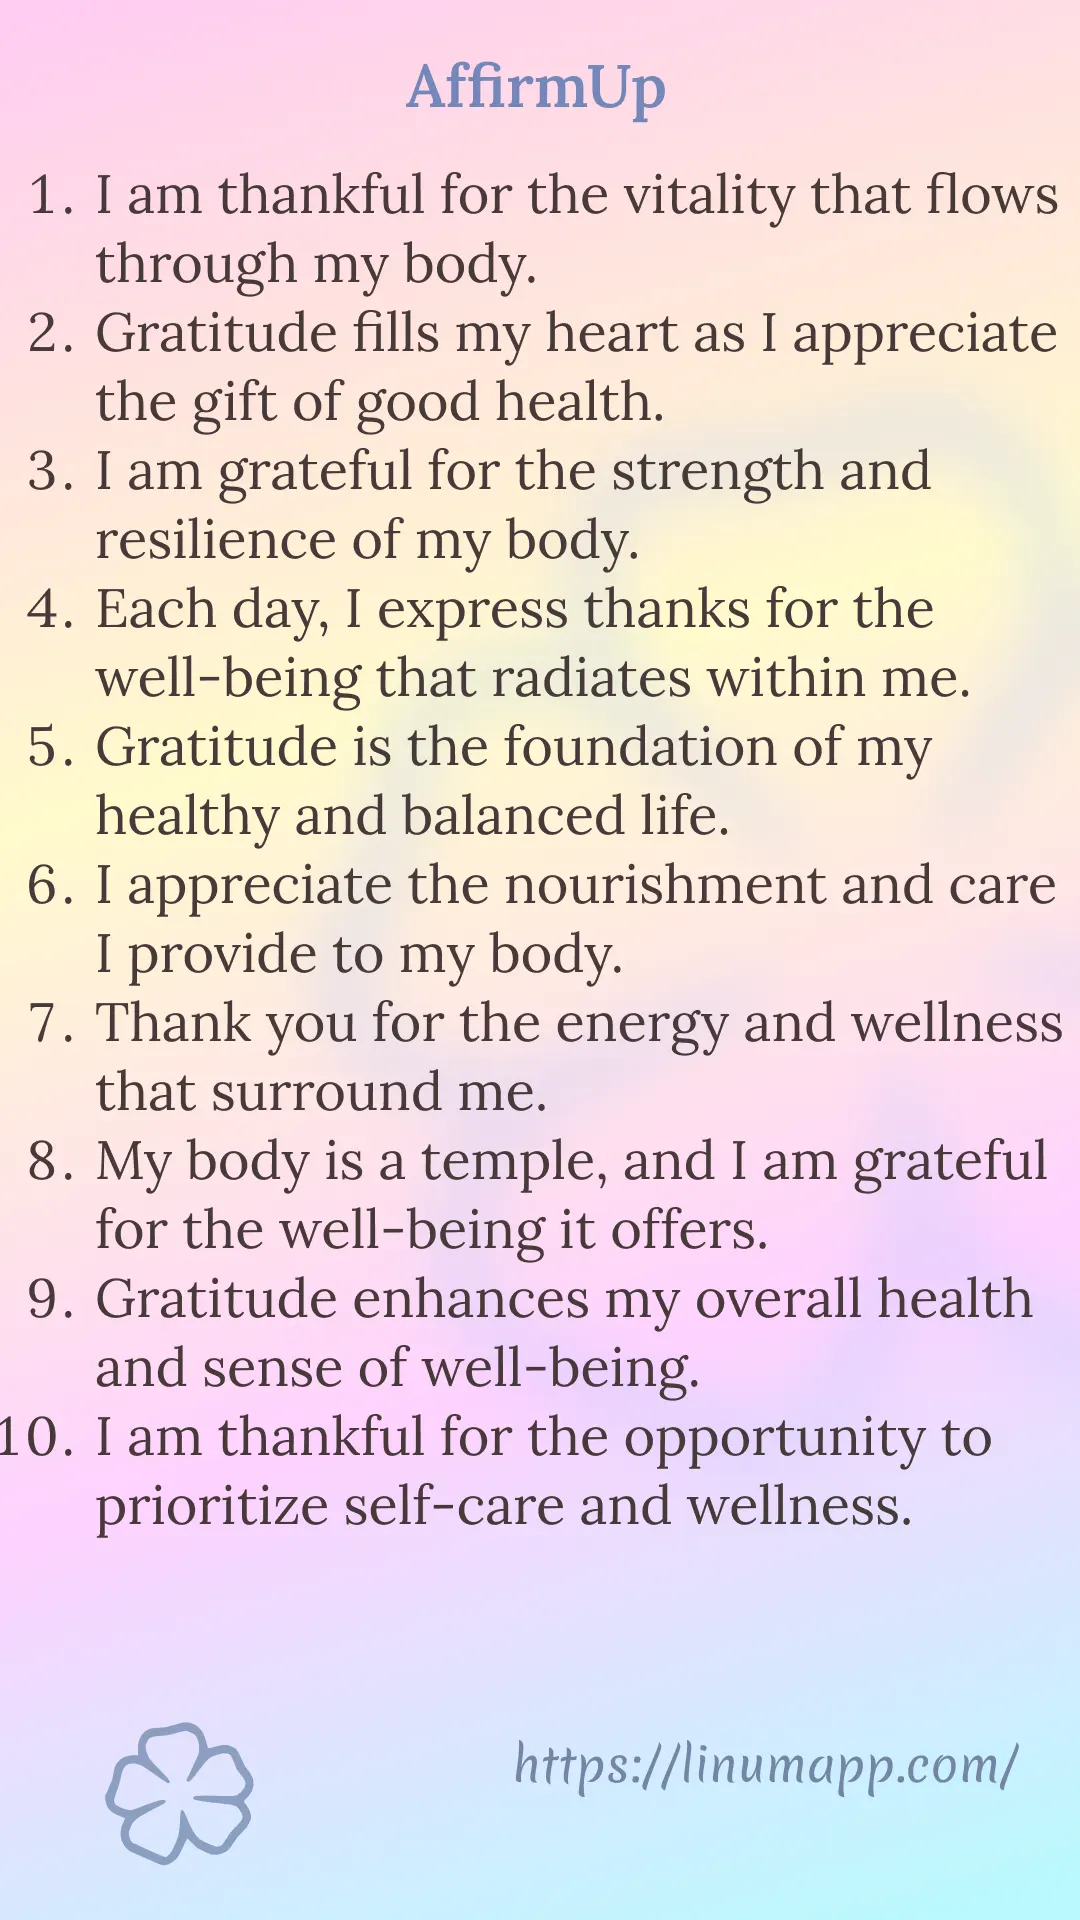 Gratitude Affirmations for Health and Wellness